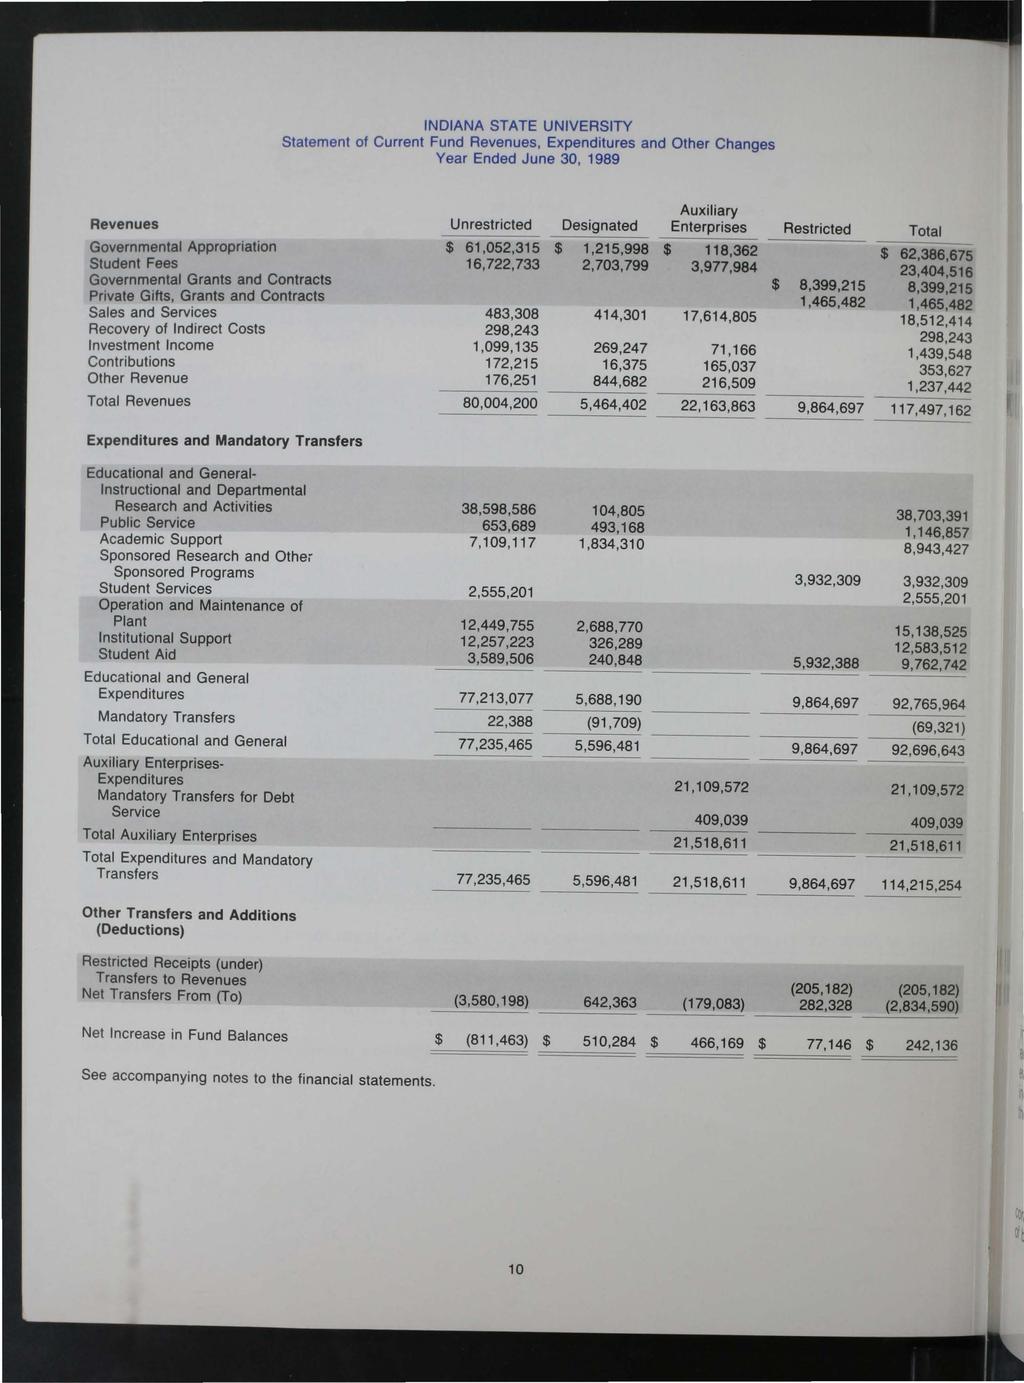 INDIANA STATE UNIVERSITY Statement of Current Fund Revenues, Expenditures and Other Changes Year Ended June 30, 1989 Revenues Unrestricted Designated Auxiliary Enterprises Restricted Total